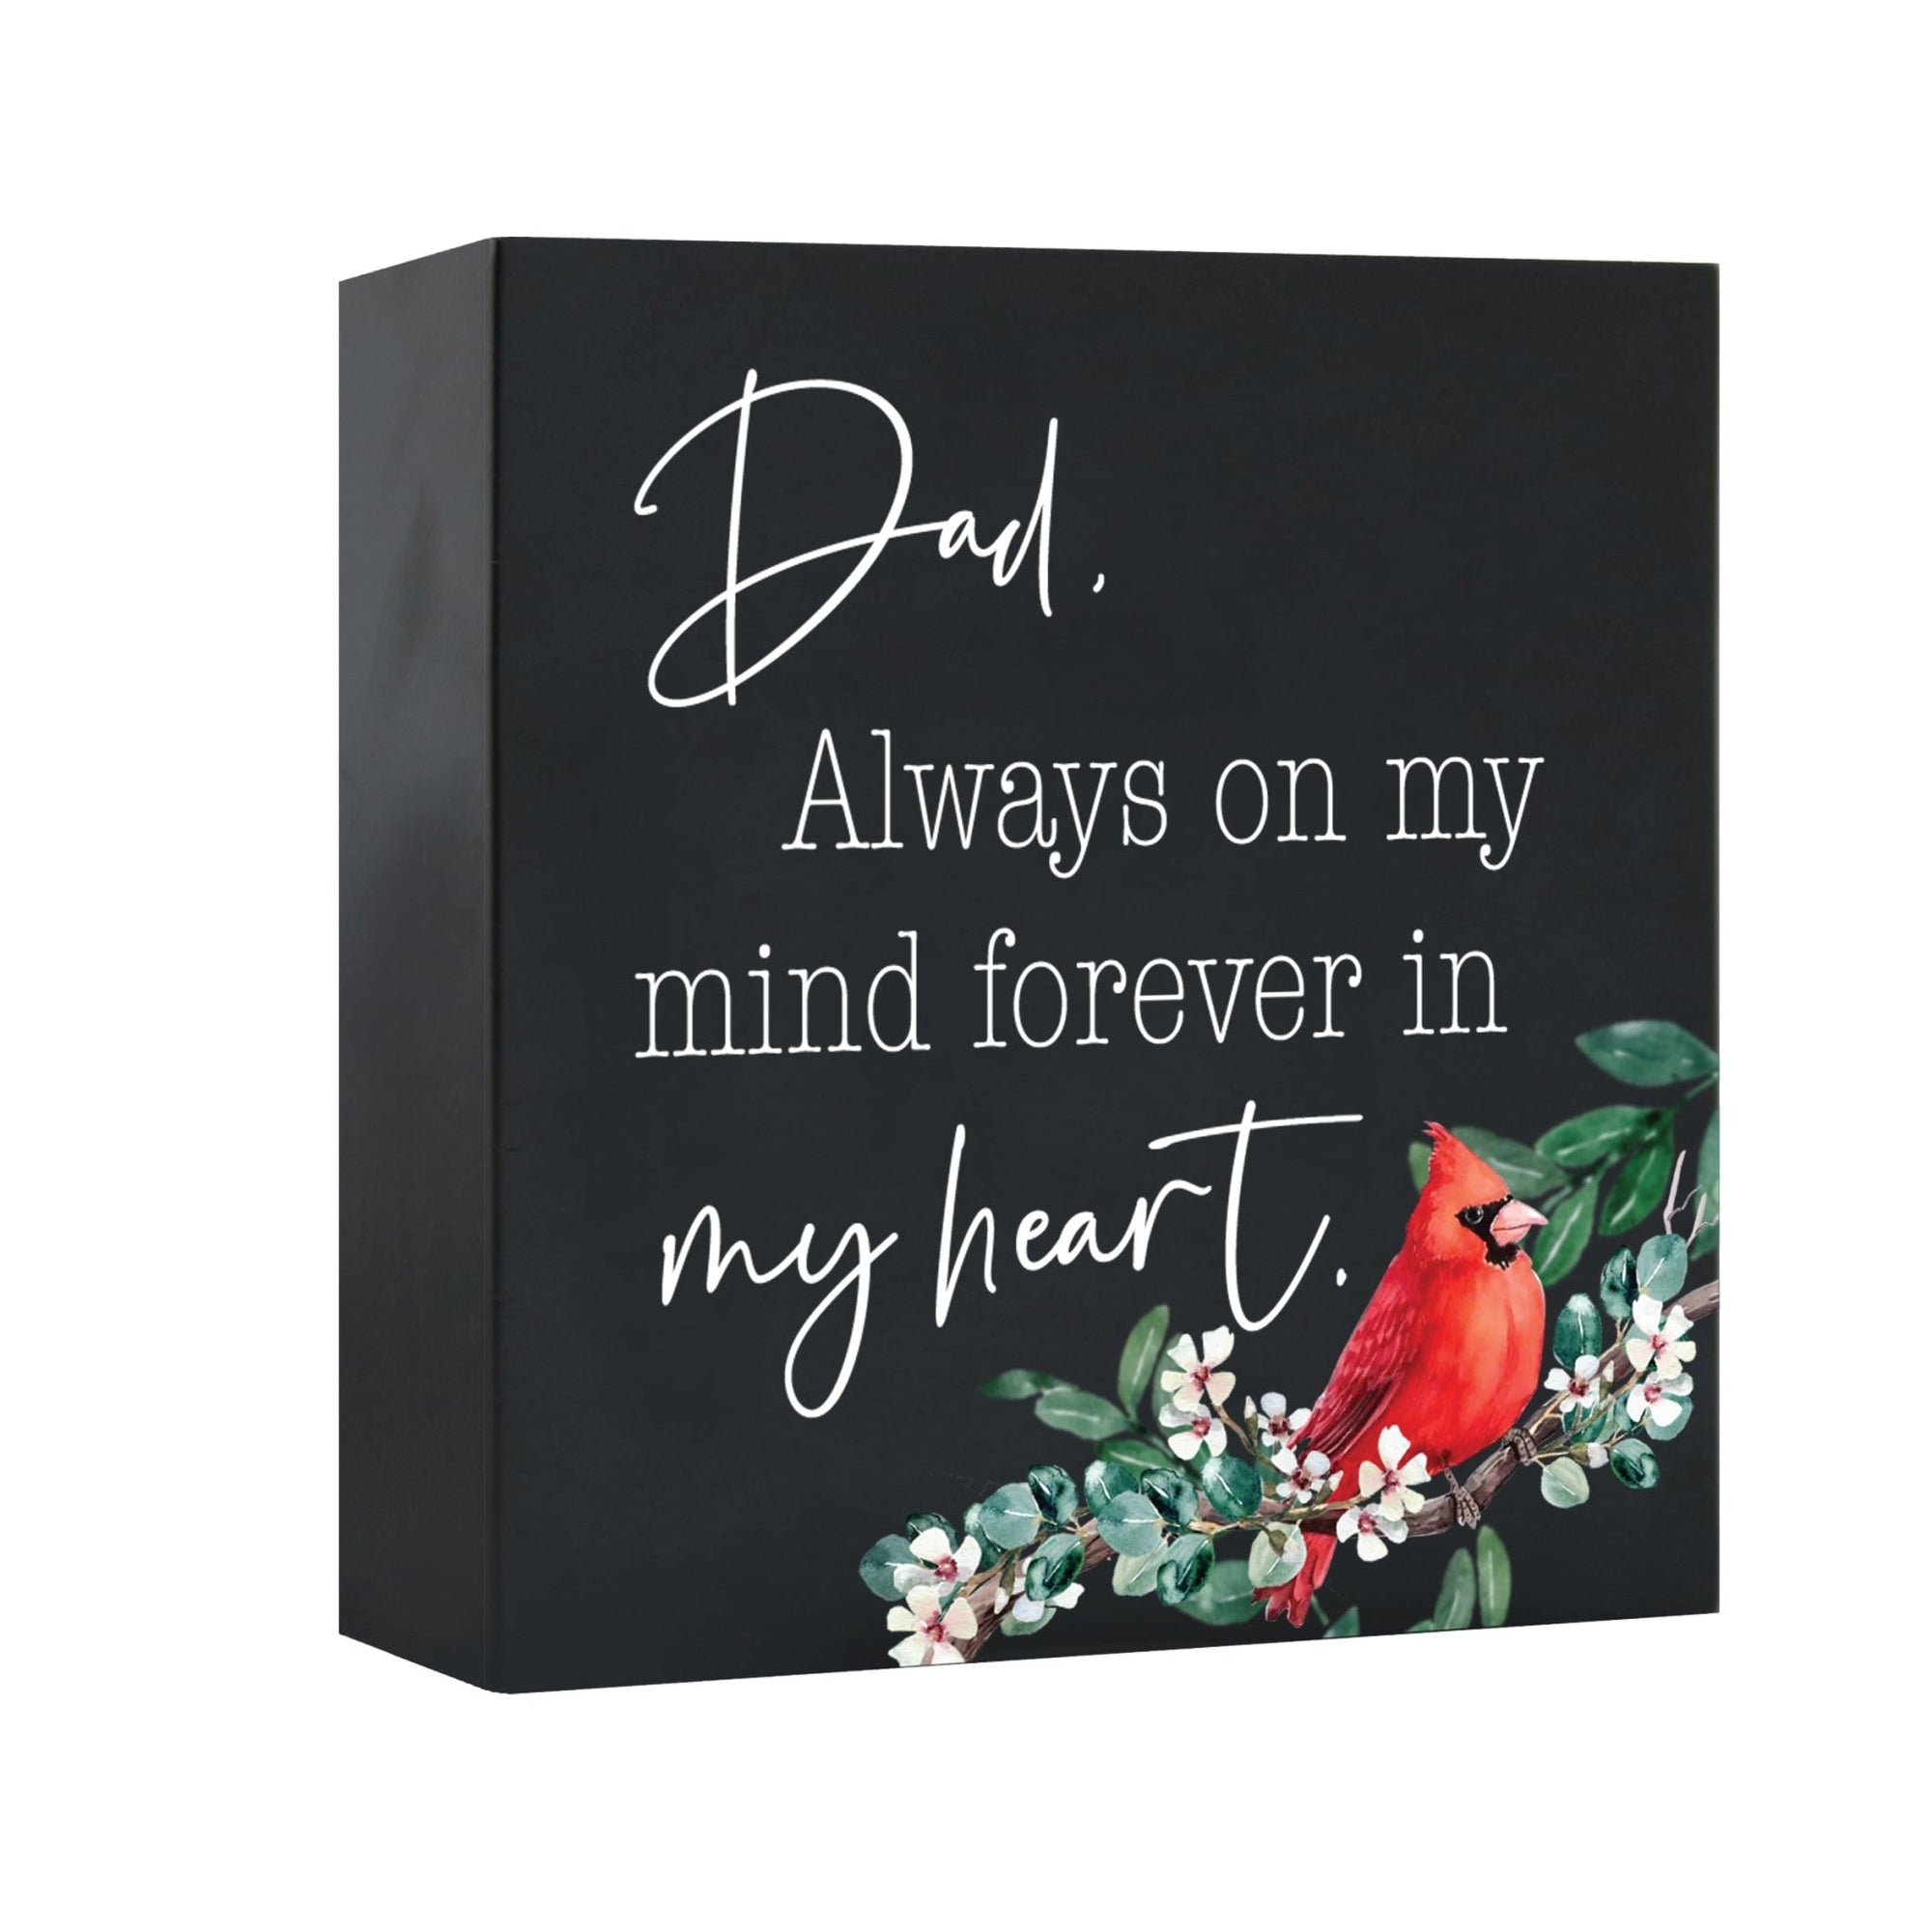 Lifesong Milestones Memorial Wooden Cremation Urn Box for Human Ashes - A beautiful and meaningful resting place